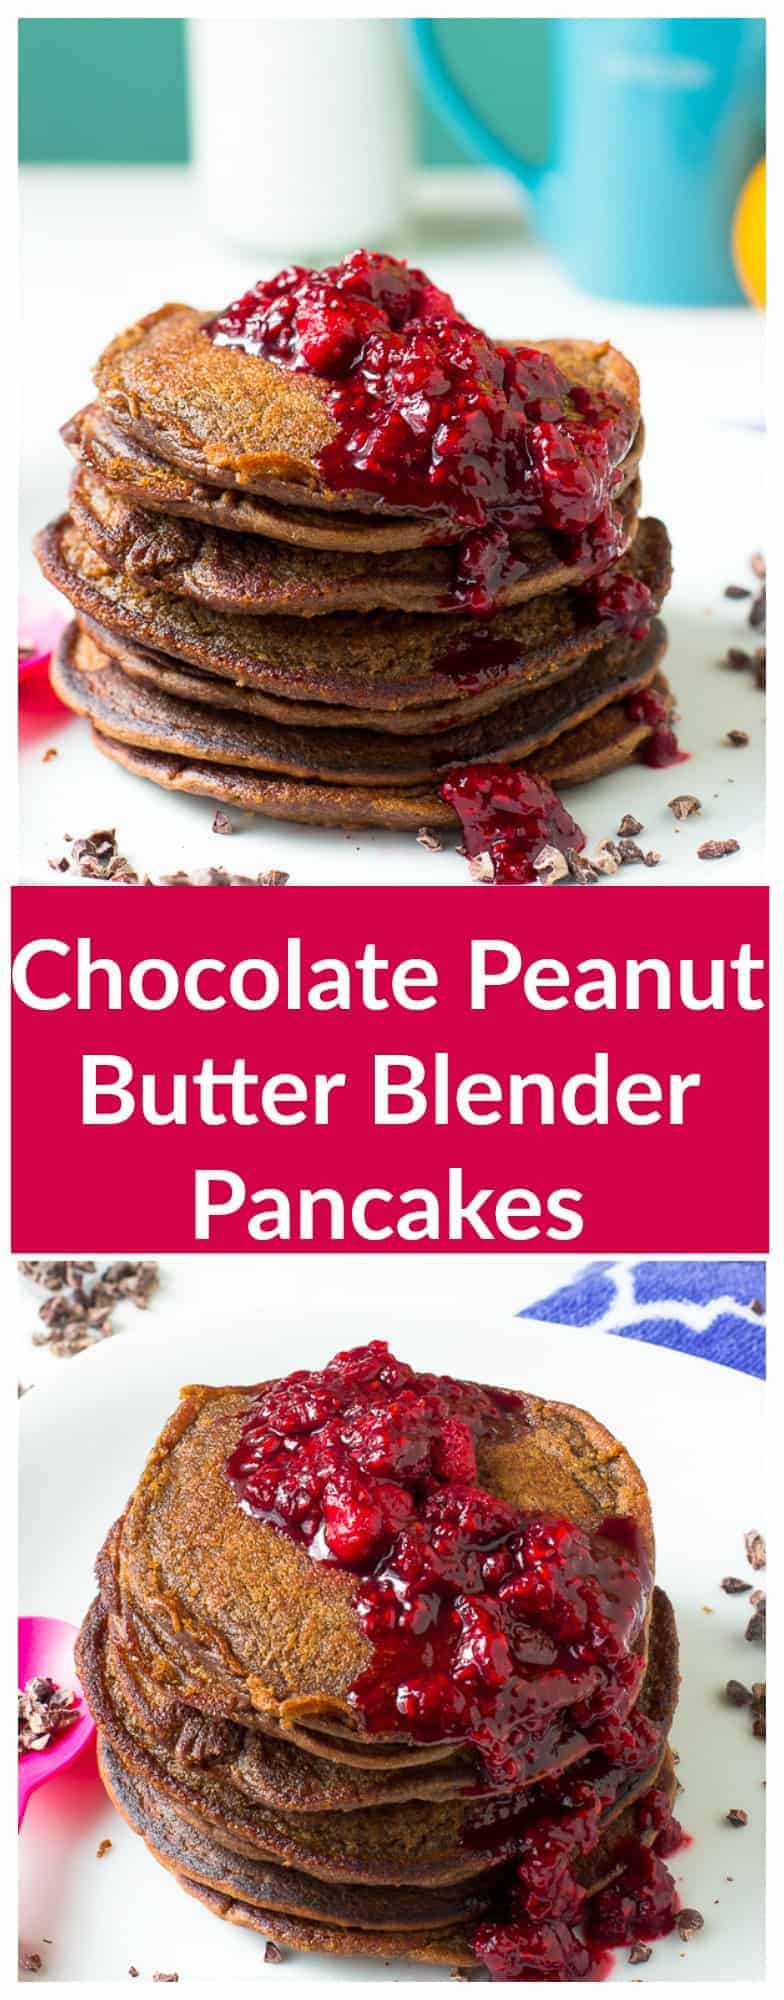 These Chocolate Peanut Butter Blender Pancakes are made in just 30 minutes! It's gluten free, vegan and topped with a delicious raspberry compote.